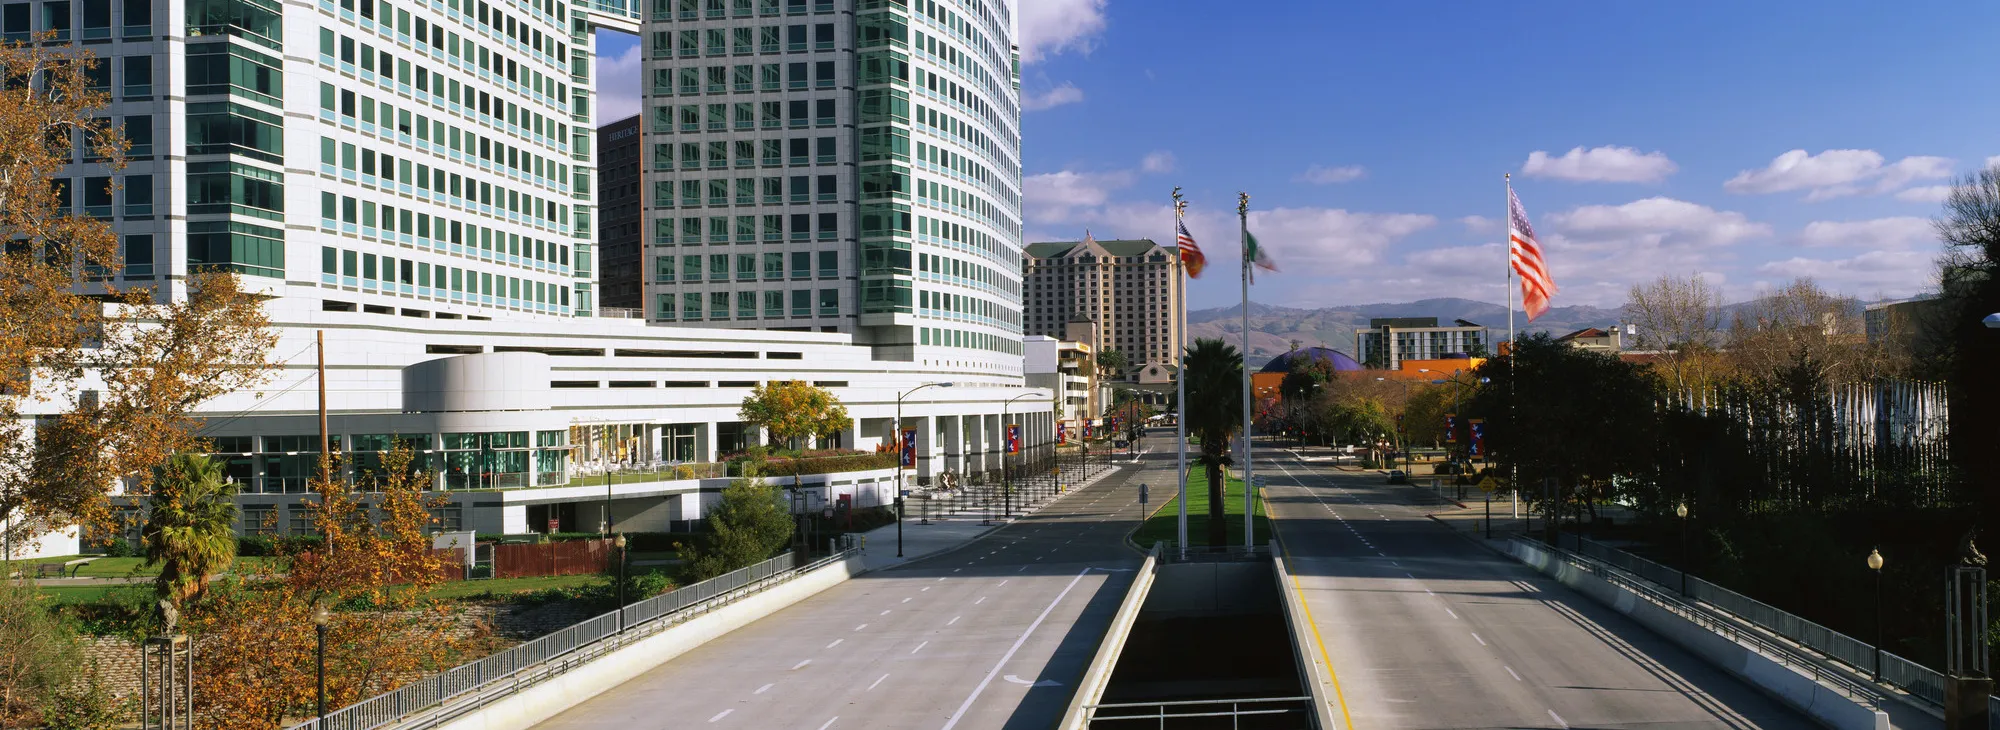 Downtown Cupertino image